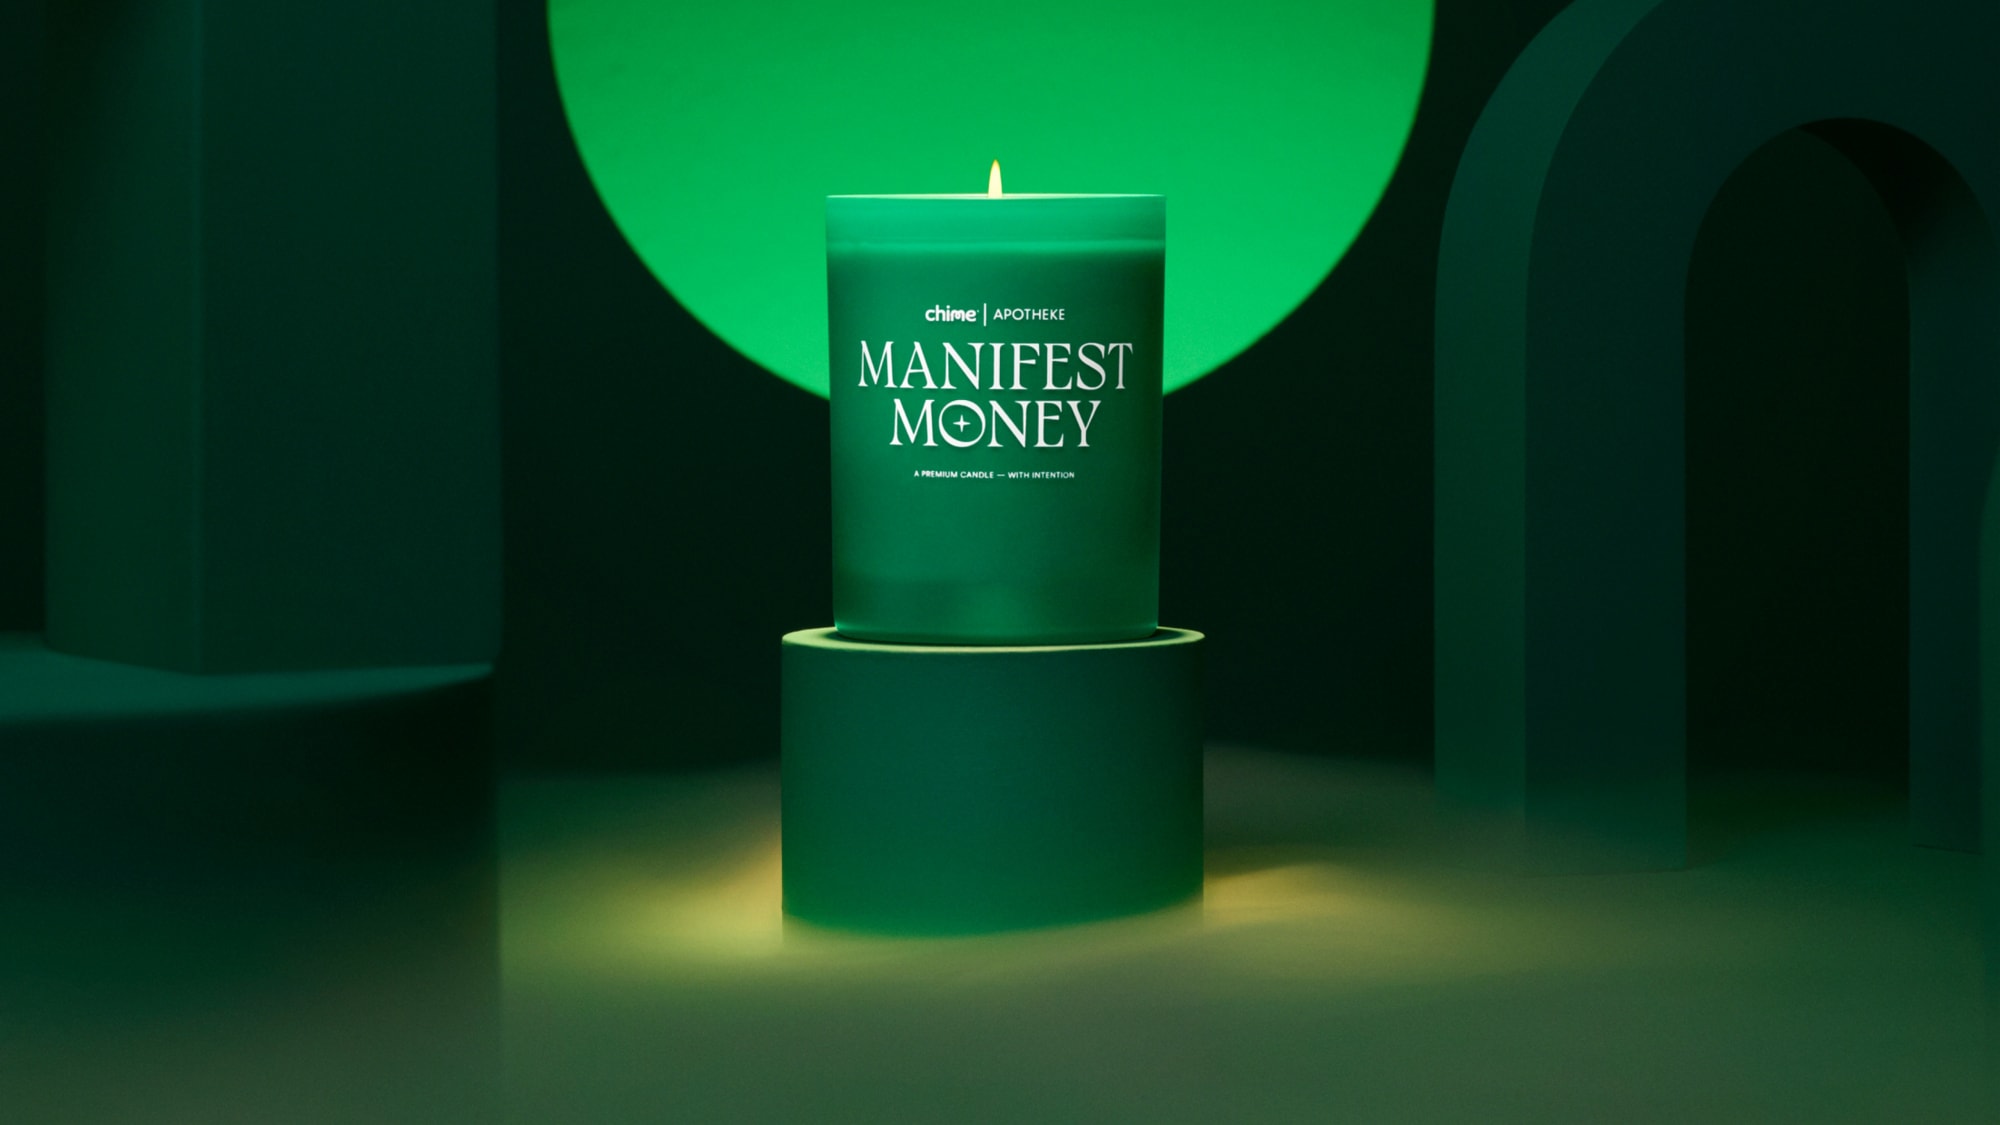 Chime and Apotheke Collab on Limited Edition Candle green white candle